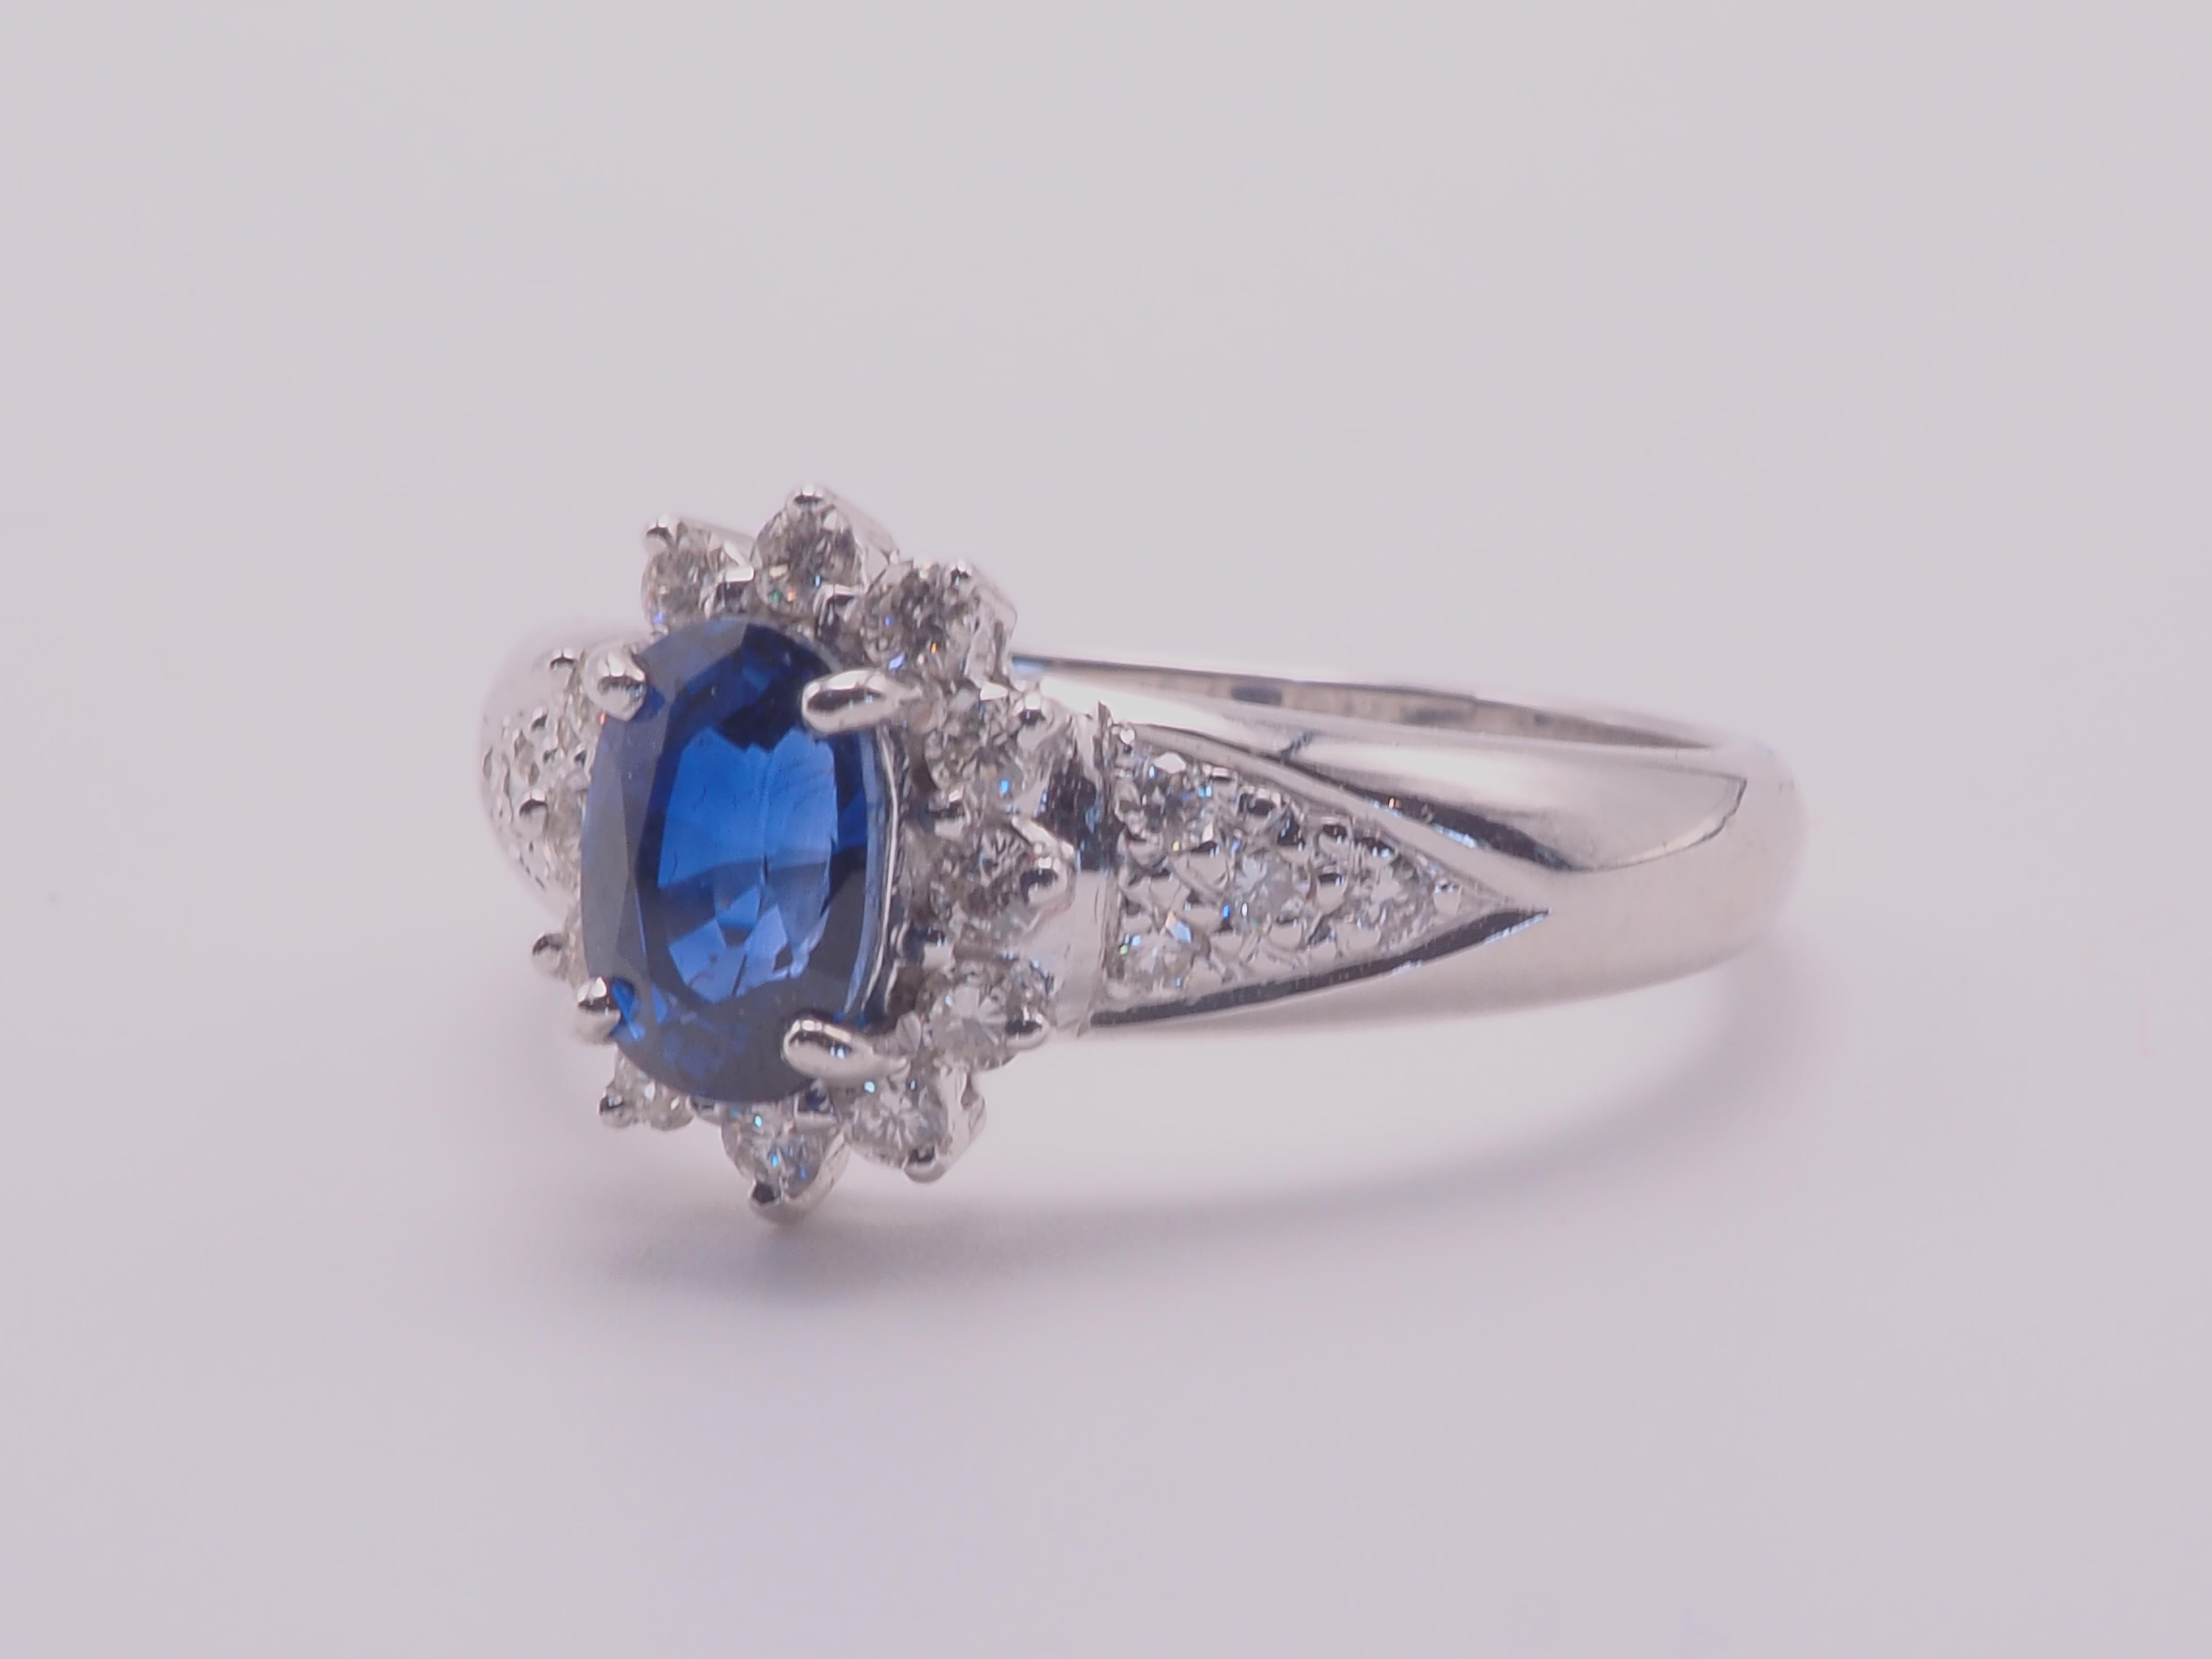 A finely crafted sapphire and diamond engagement ring. Beautiful oval blue sapphire of 1.26 carats set in the middle nicely. The blue gemstone has great brilliance with strong saturation which can be visible to some degree in the shadows, very clear